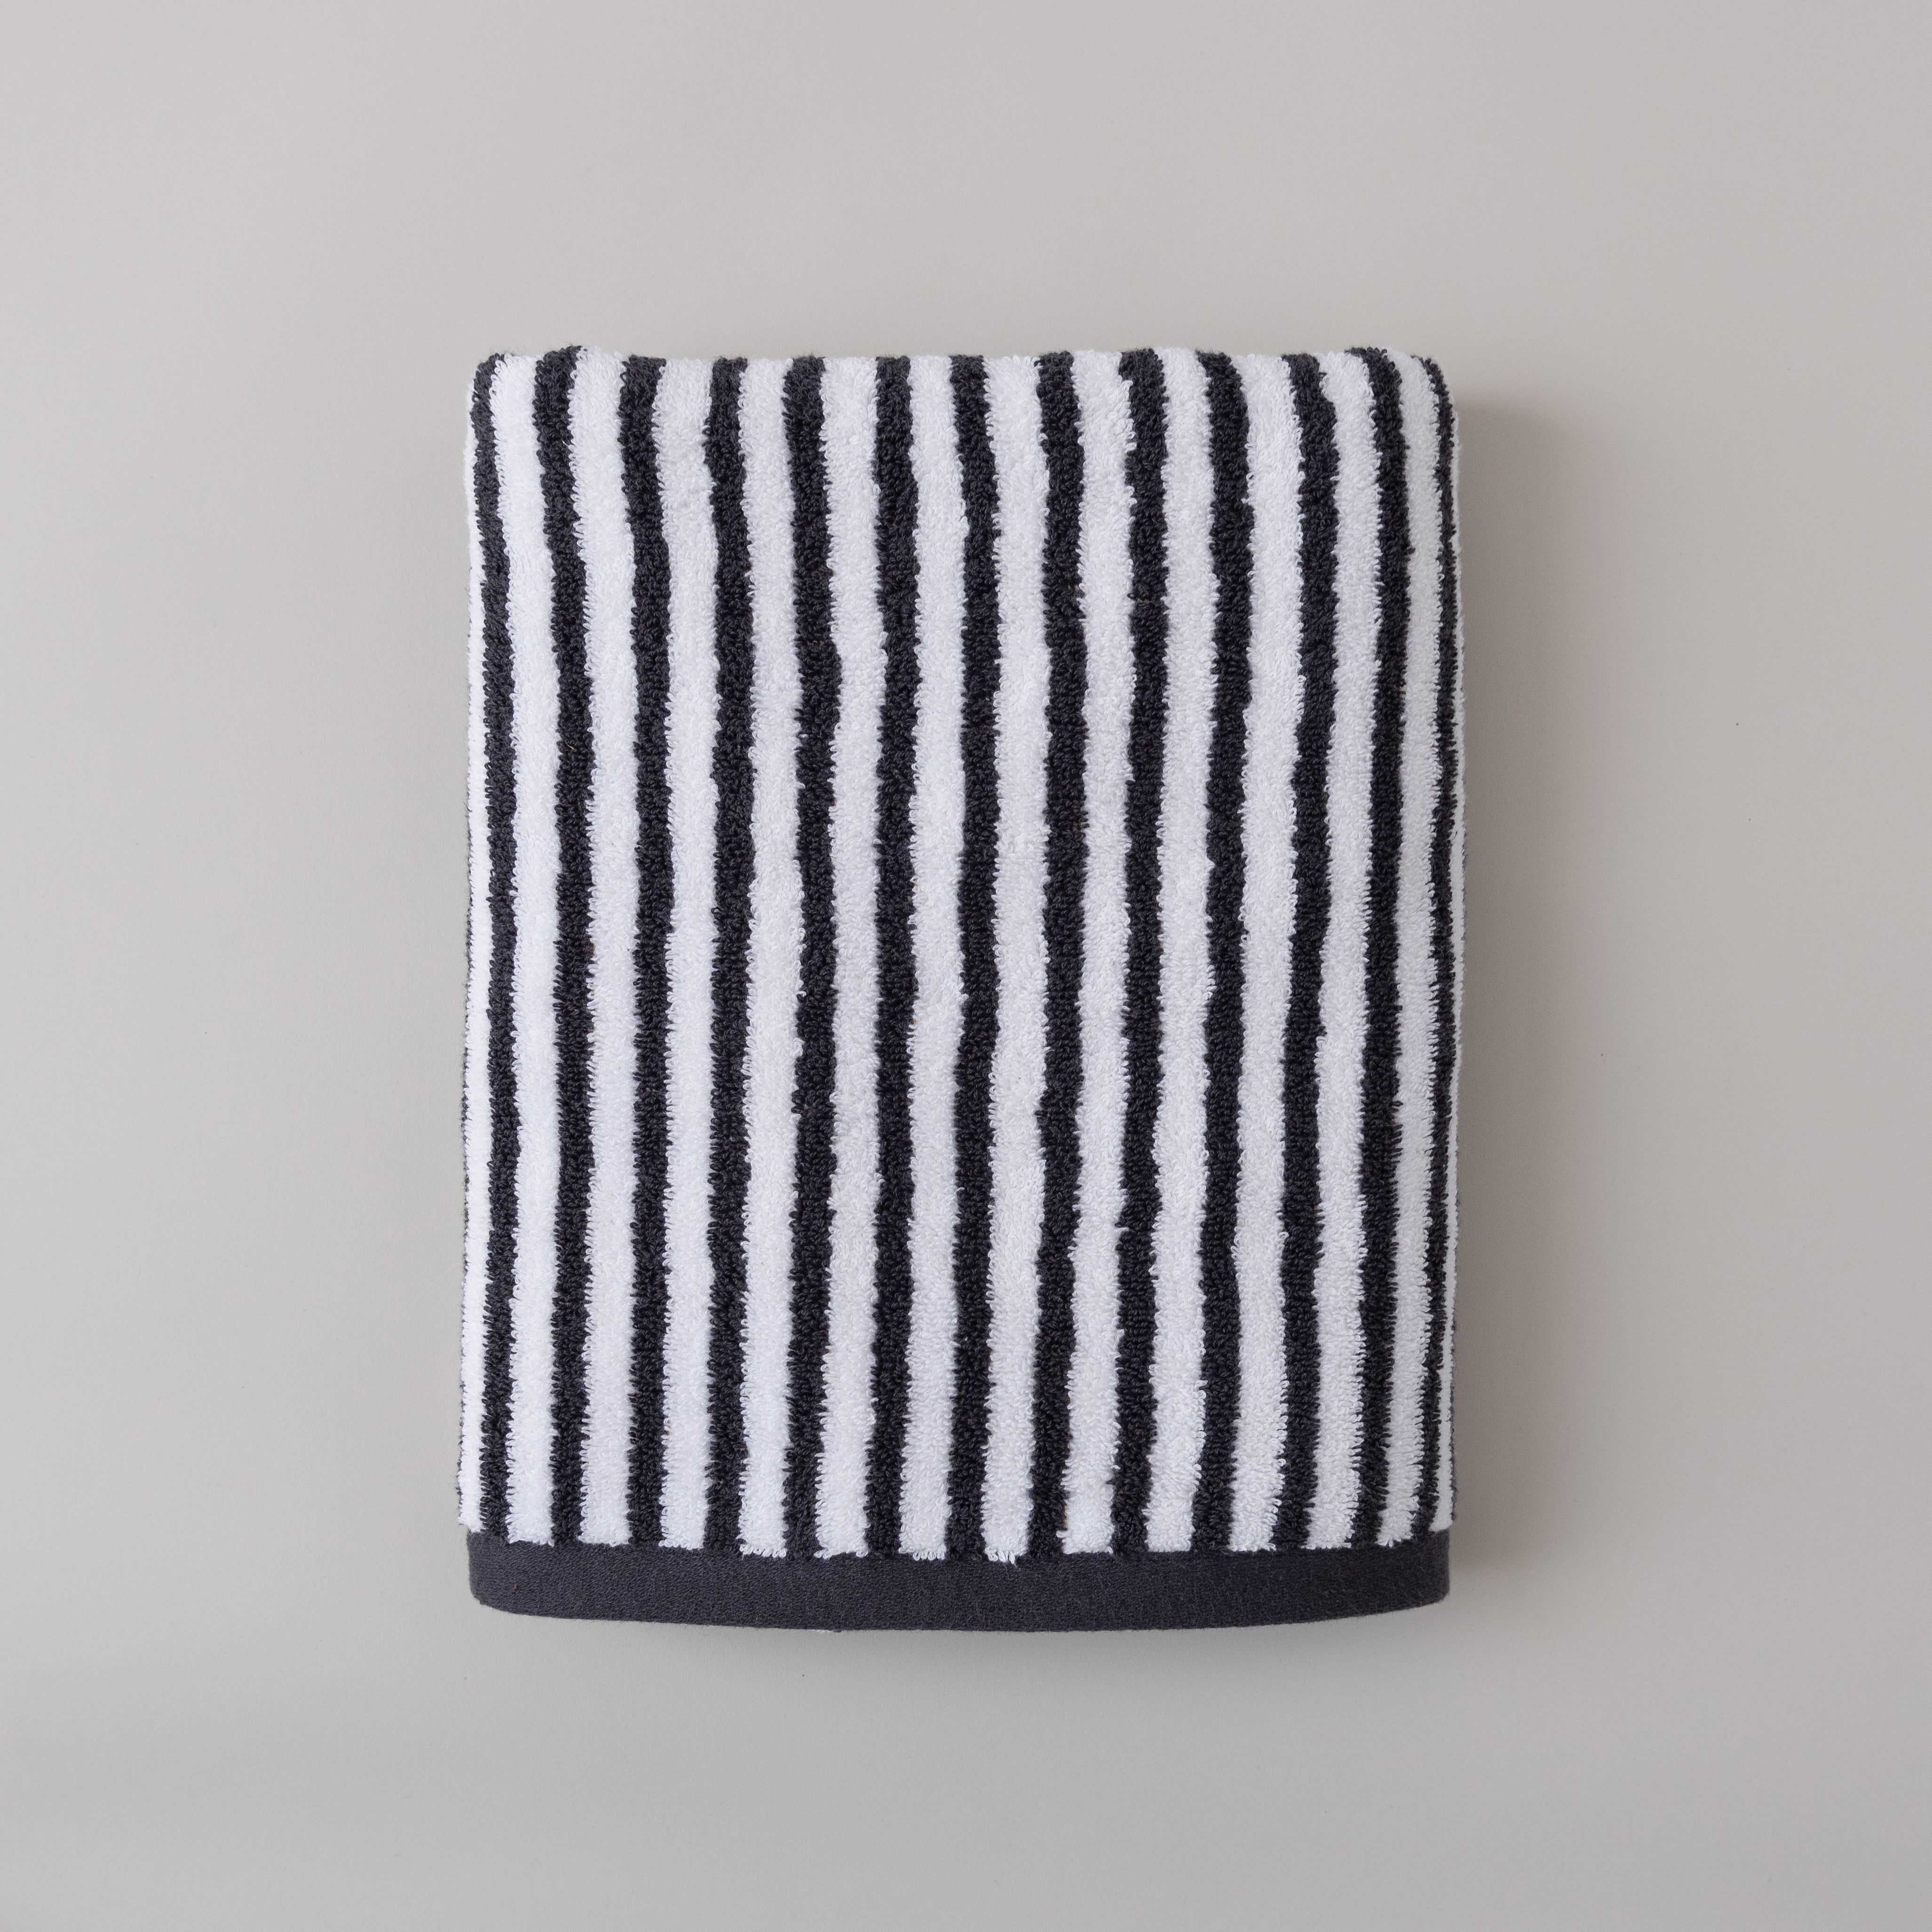 Mustard and Charcoal Striped Towel | Dunelm